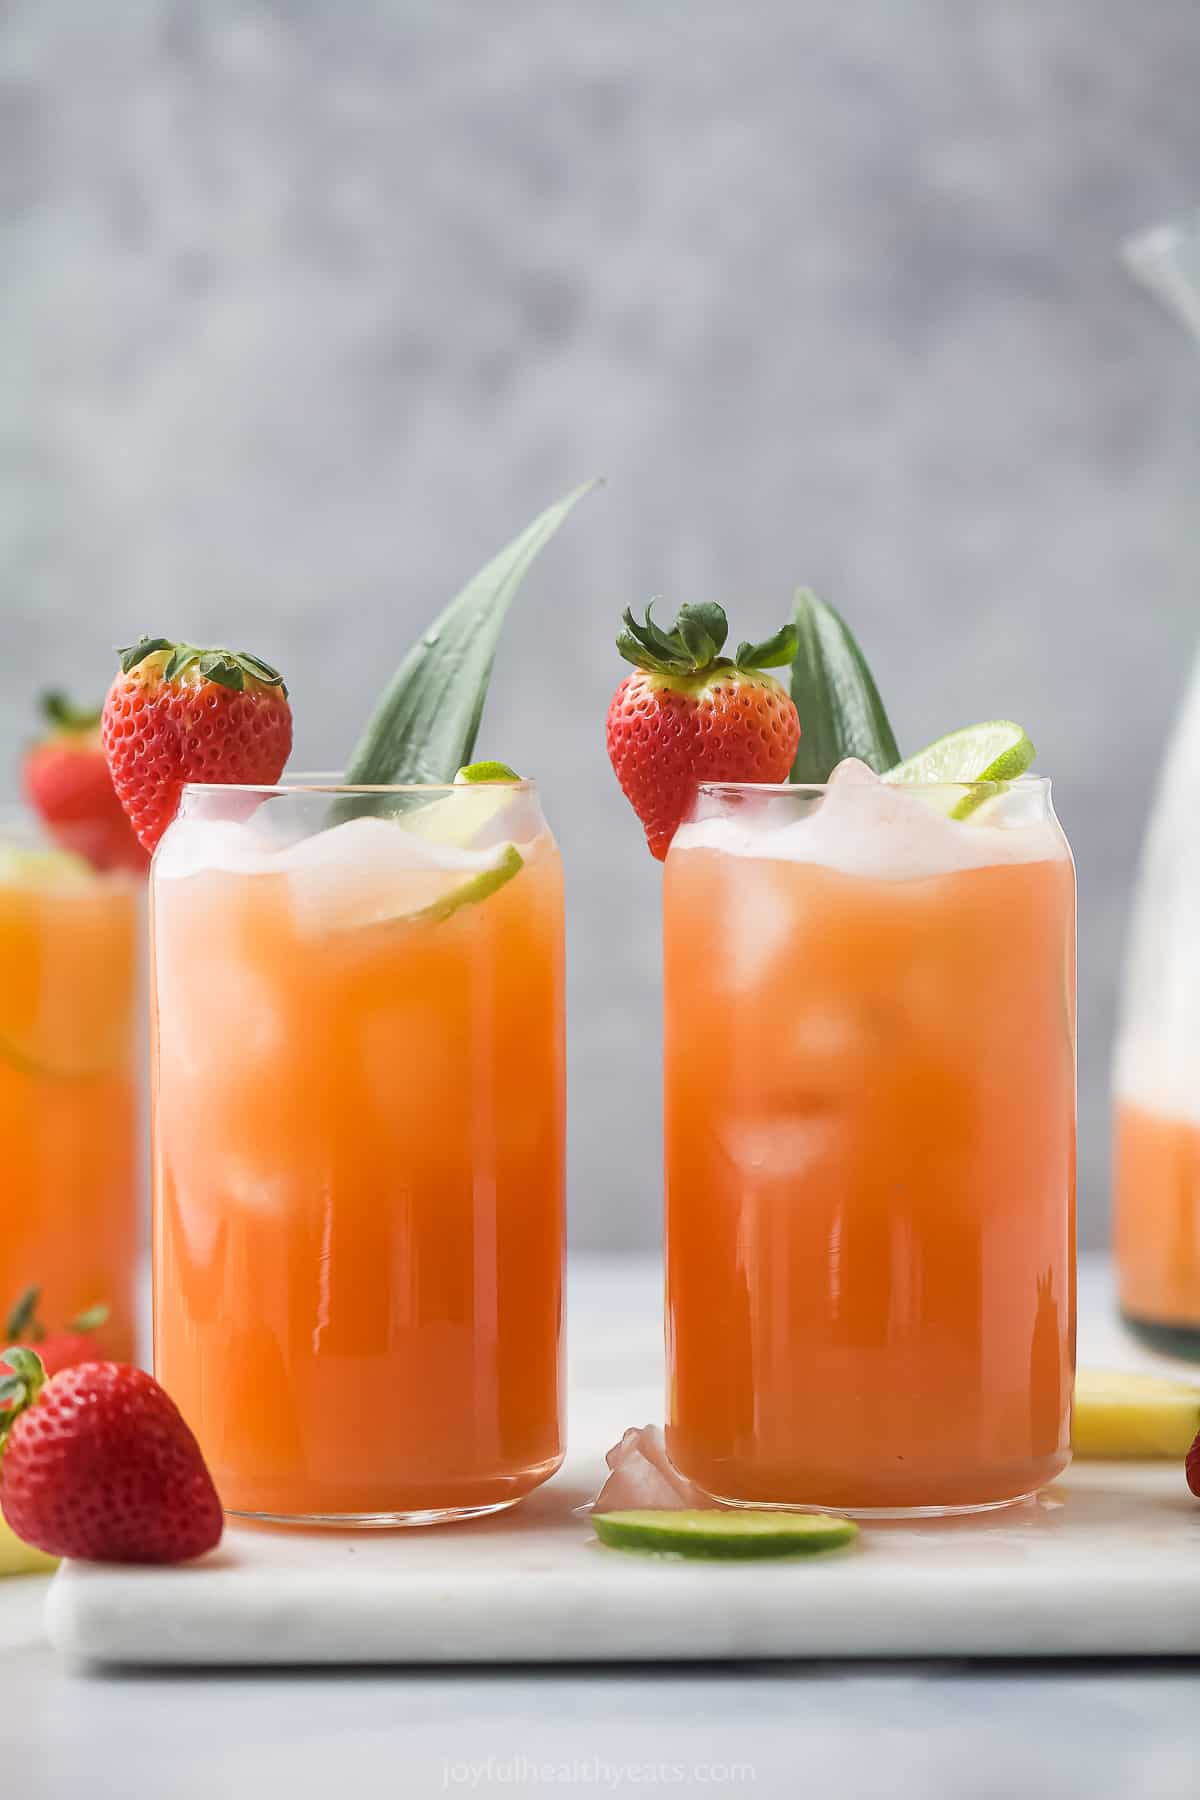 Front view of two glasses of pineapple strawberry agua fresca